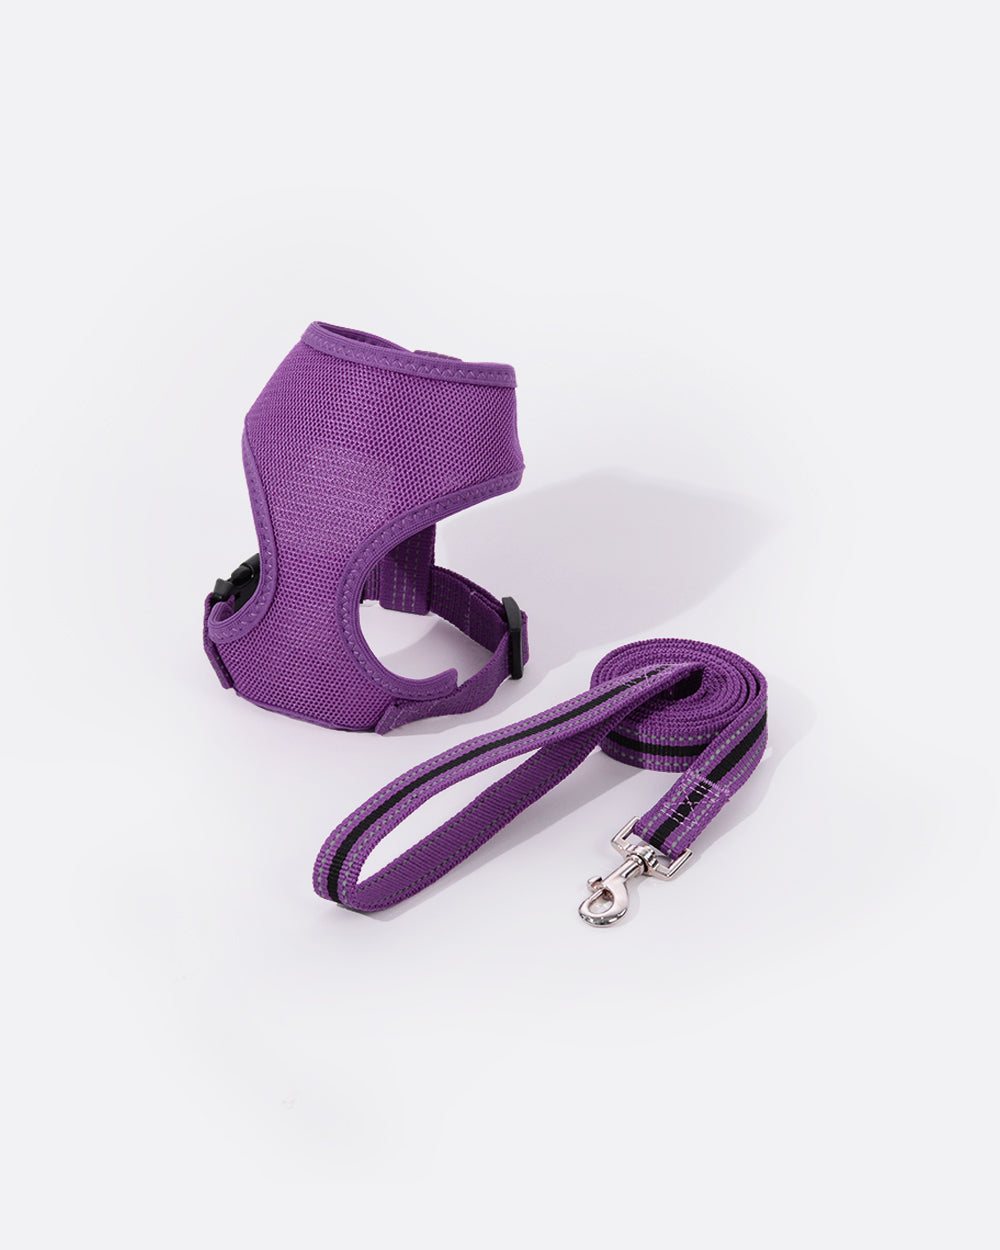 Simply Soft Harness and Leash Set - Bright Violet